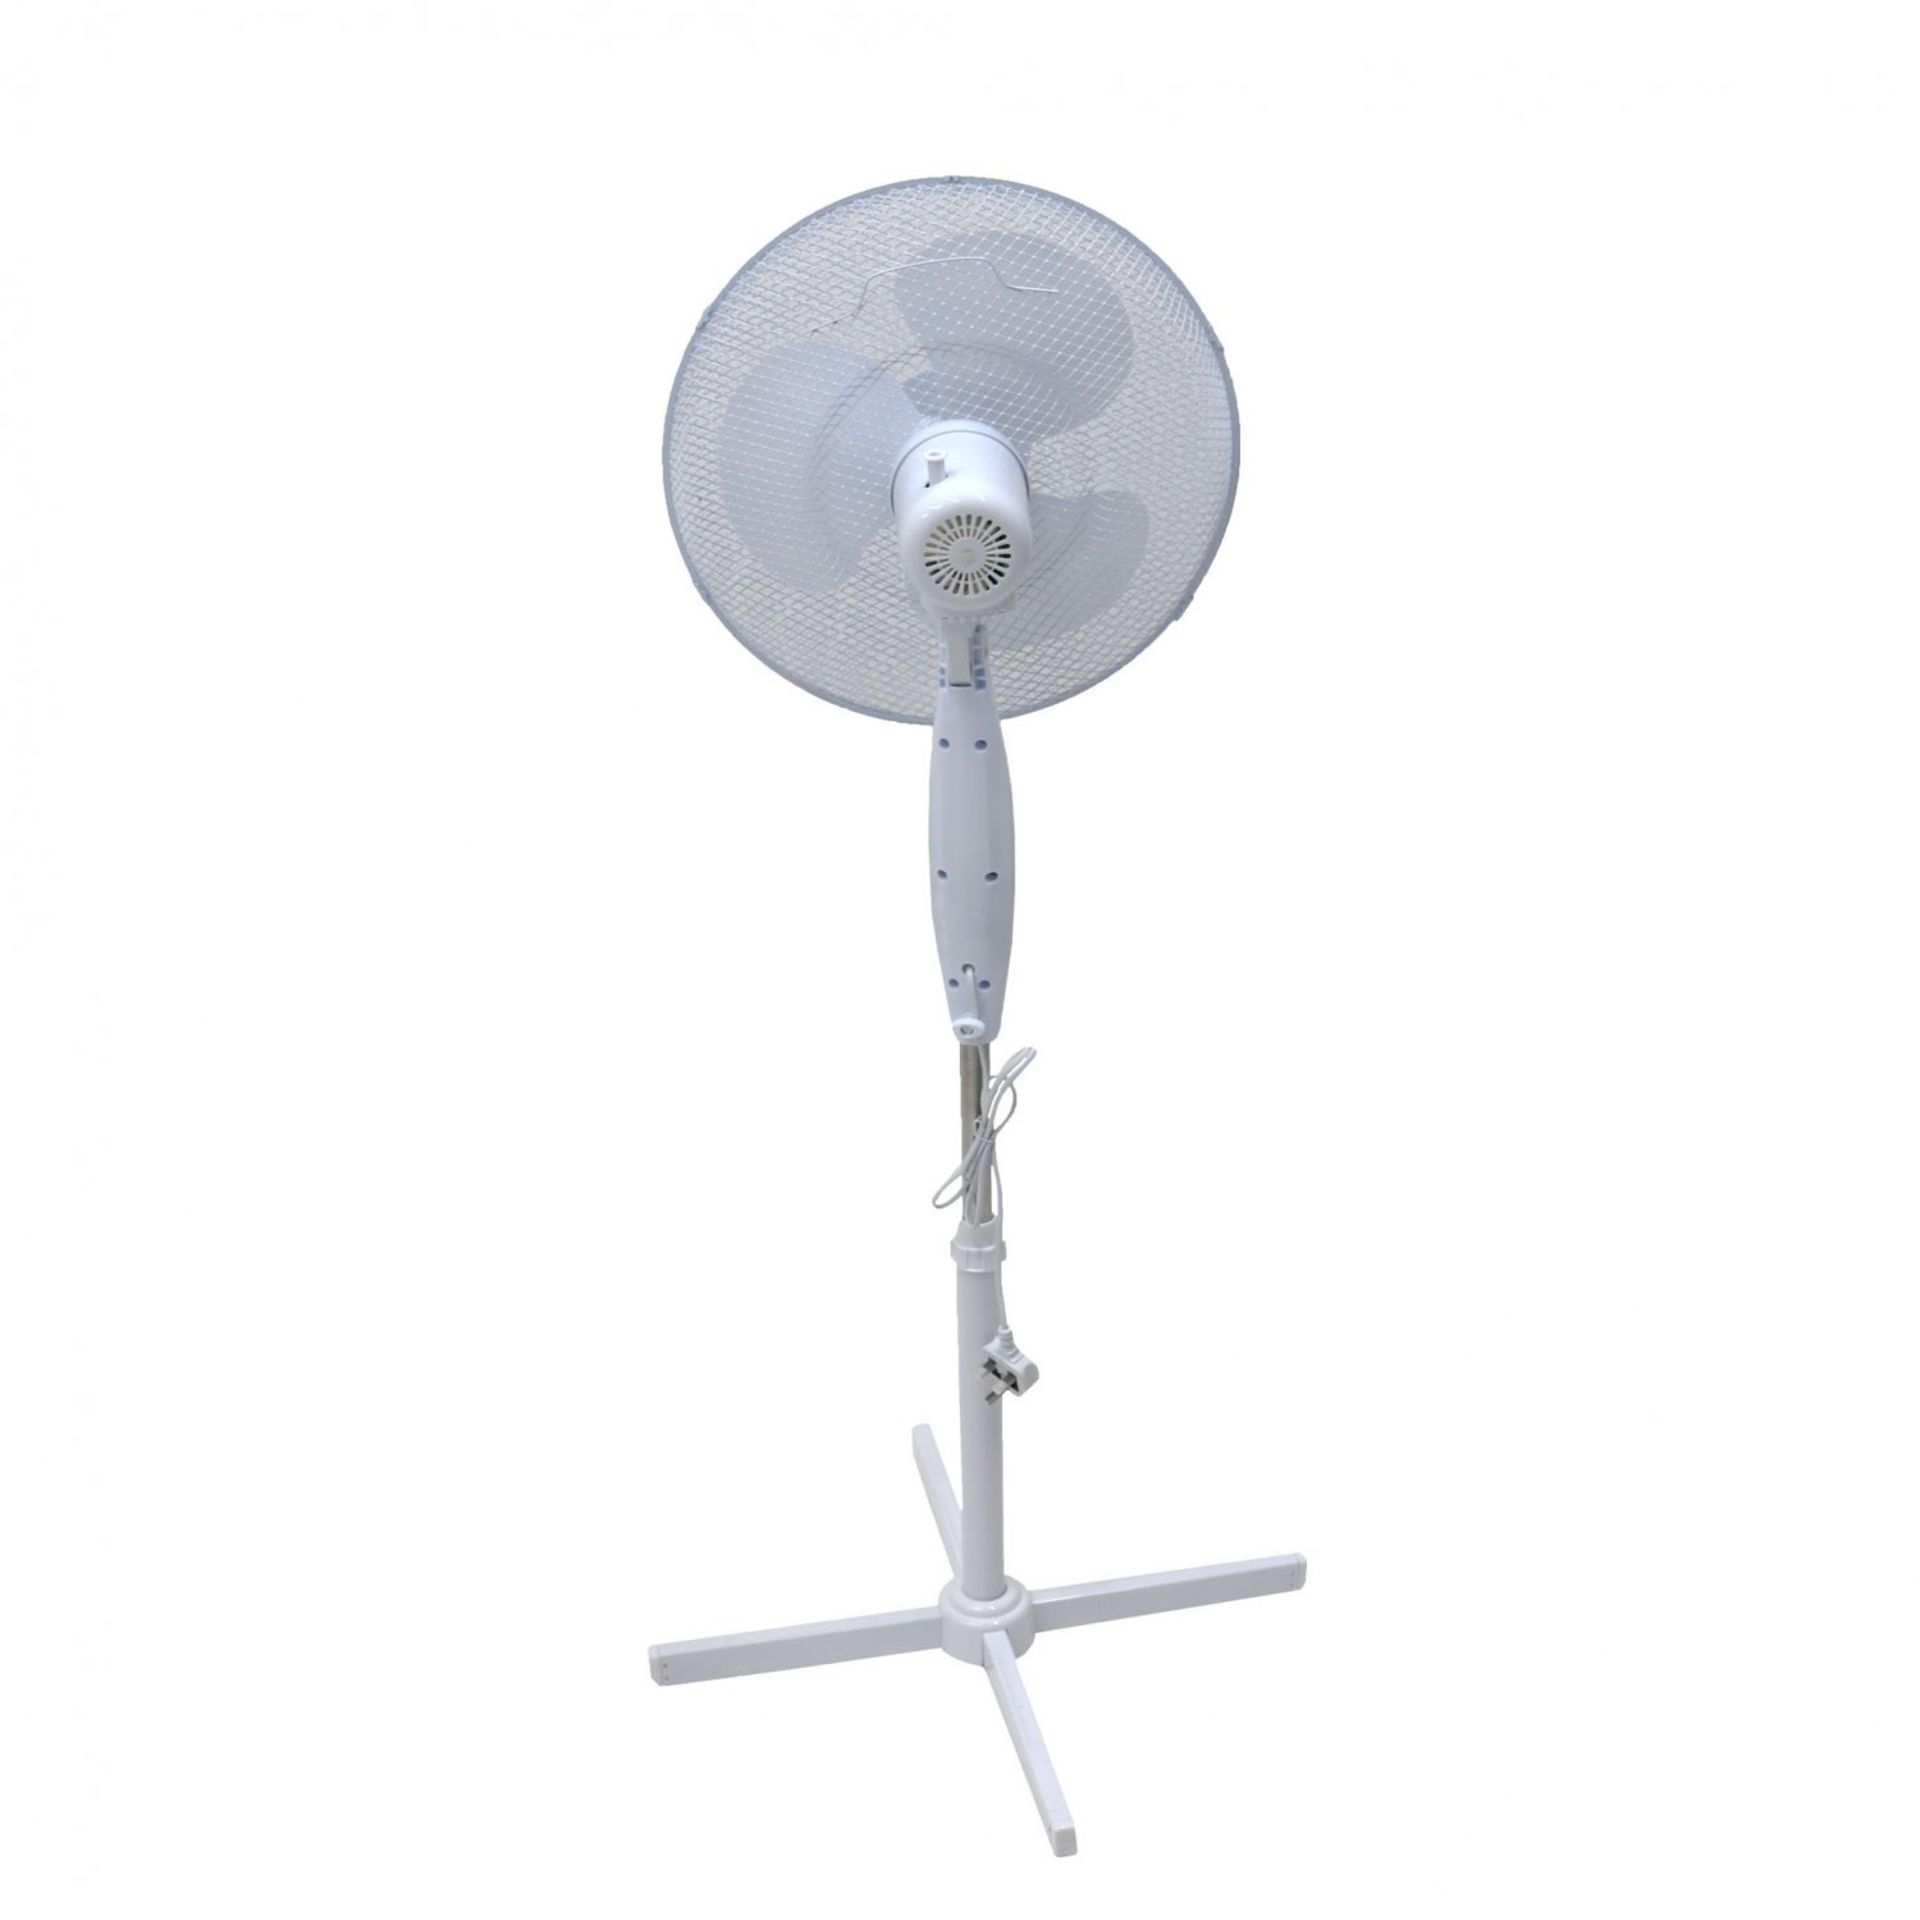 (RU258) 16" Oscillating Pedestal Electric Fan The fan head oscillates and tilts which... - Image 2 of 2